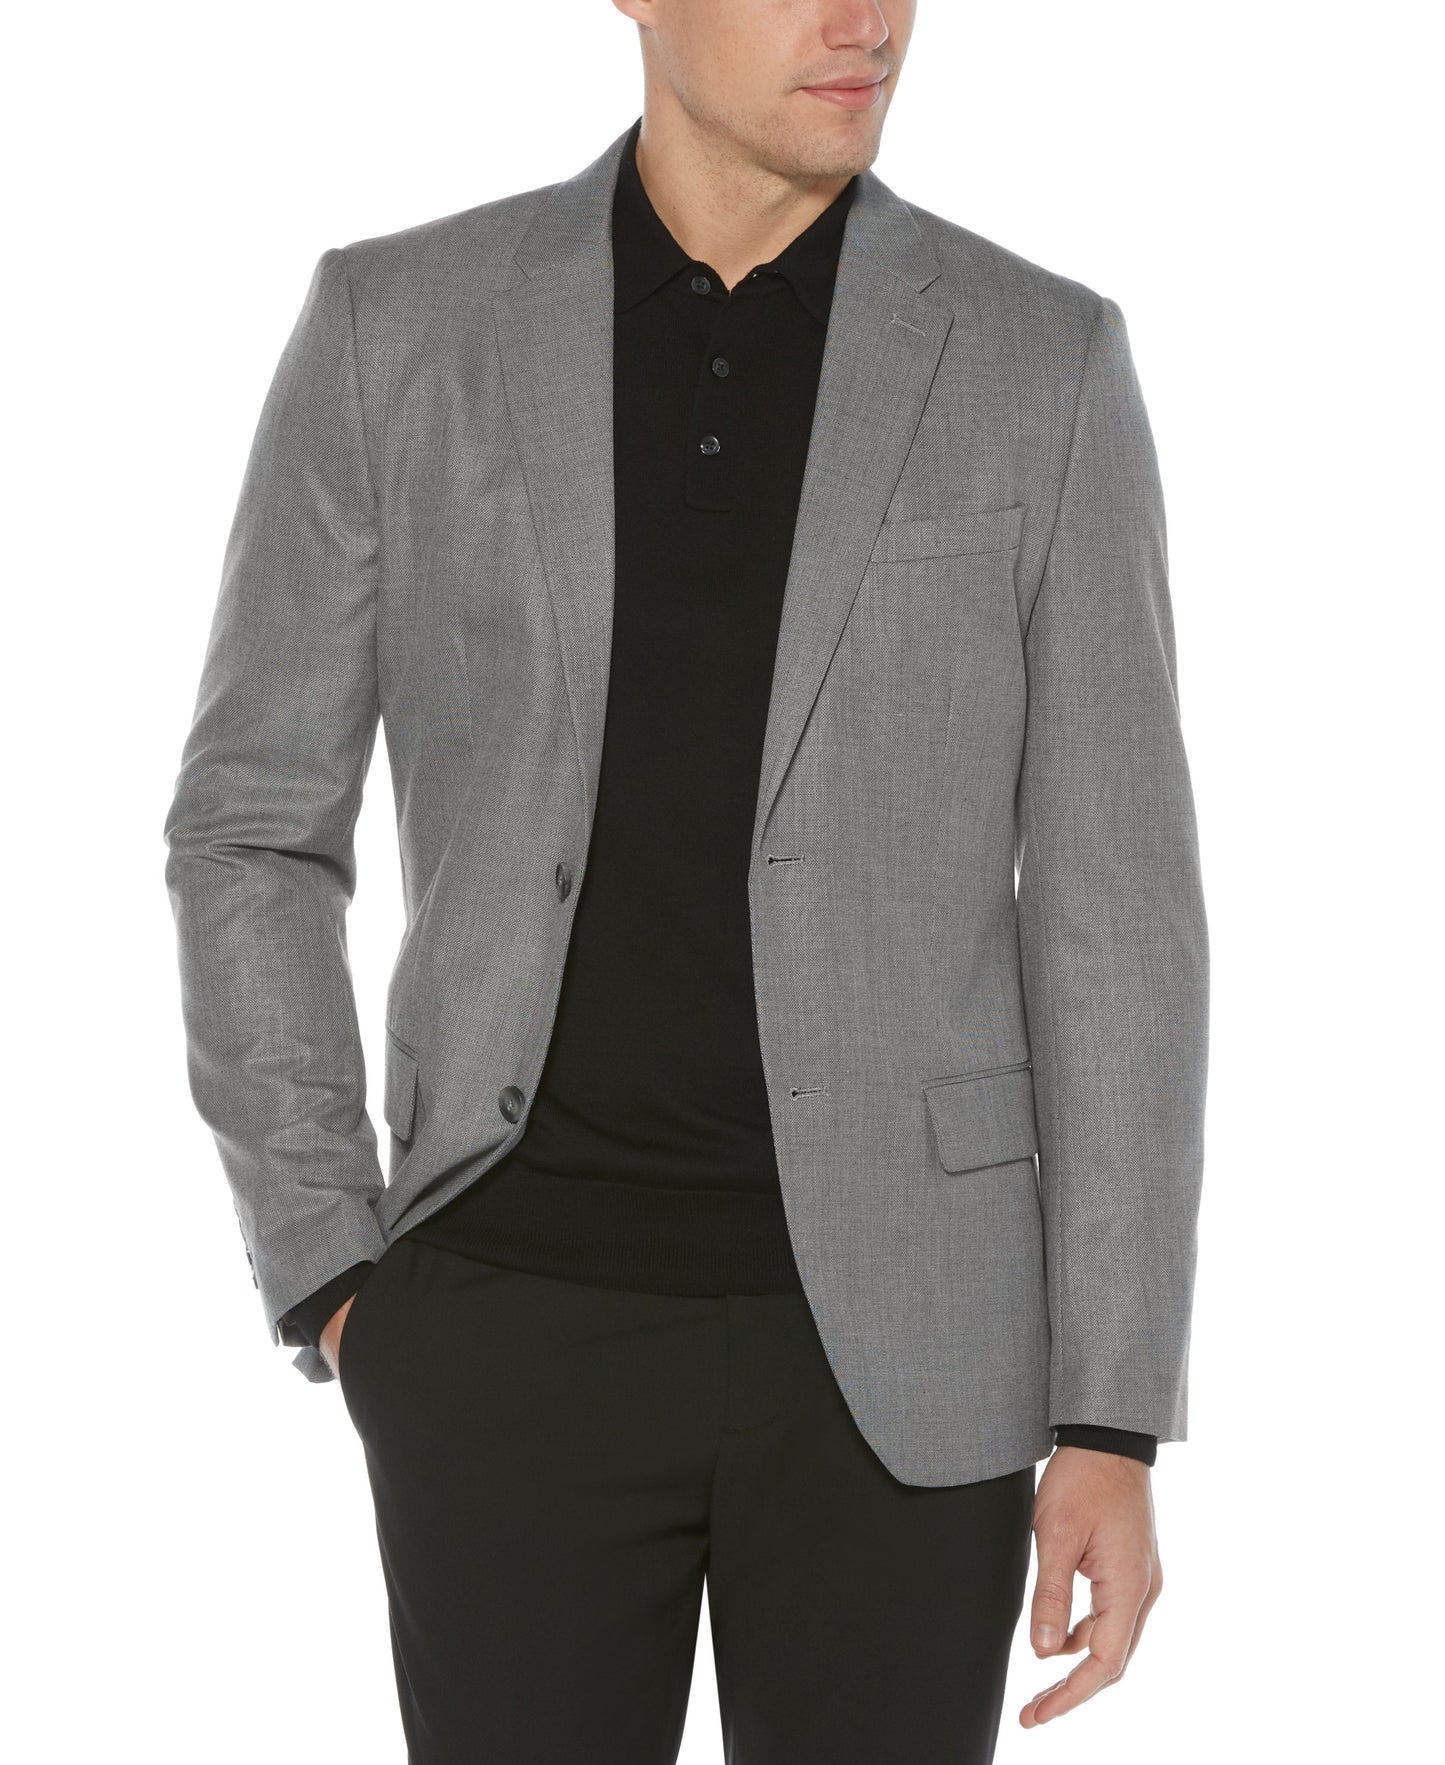 Slim Fit Twill Gray Suit Jacket